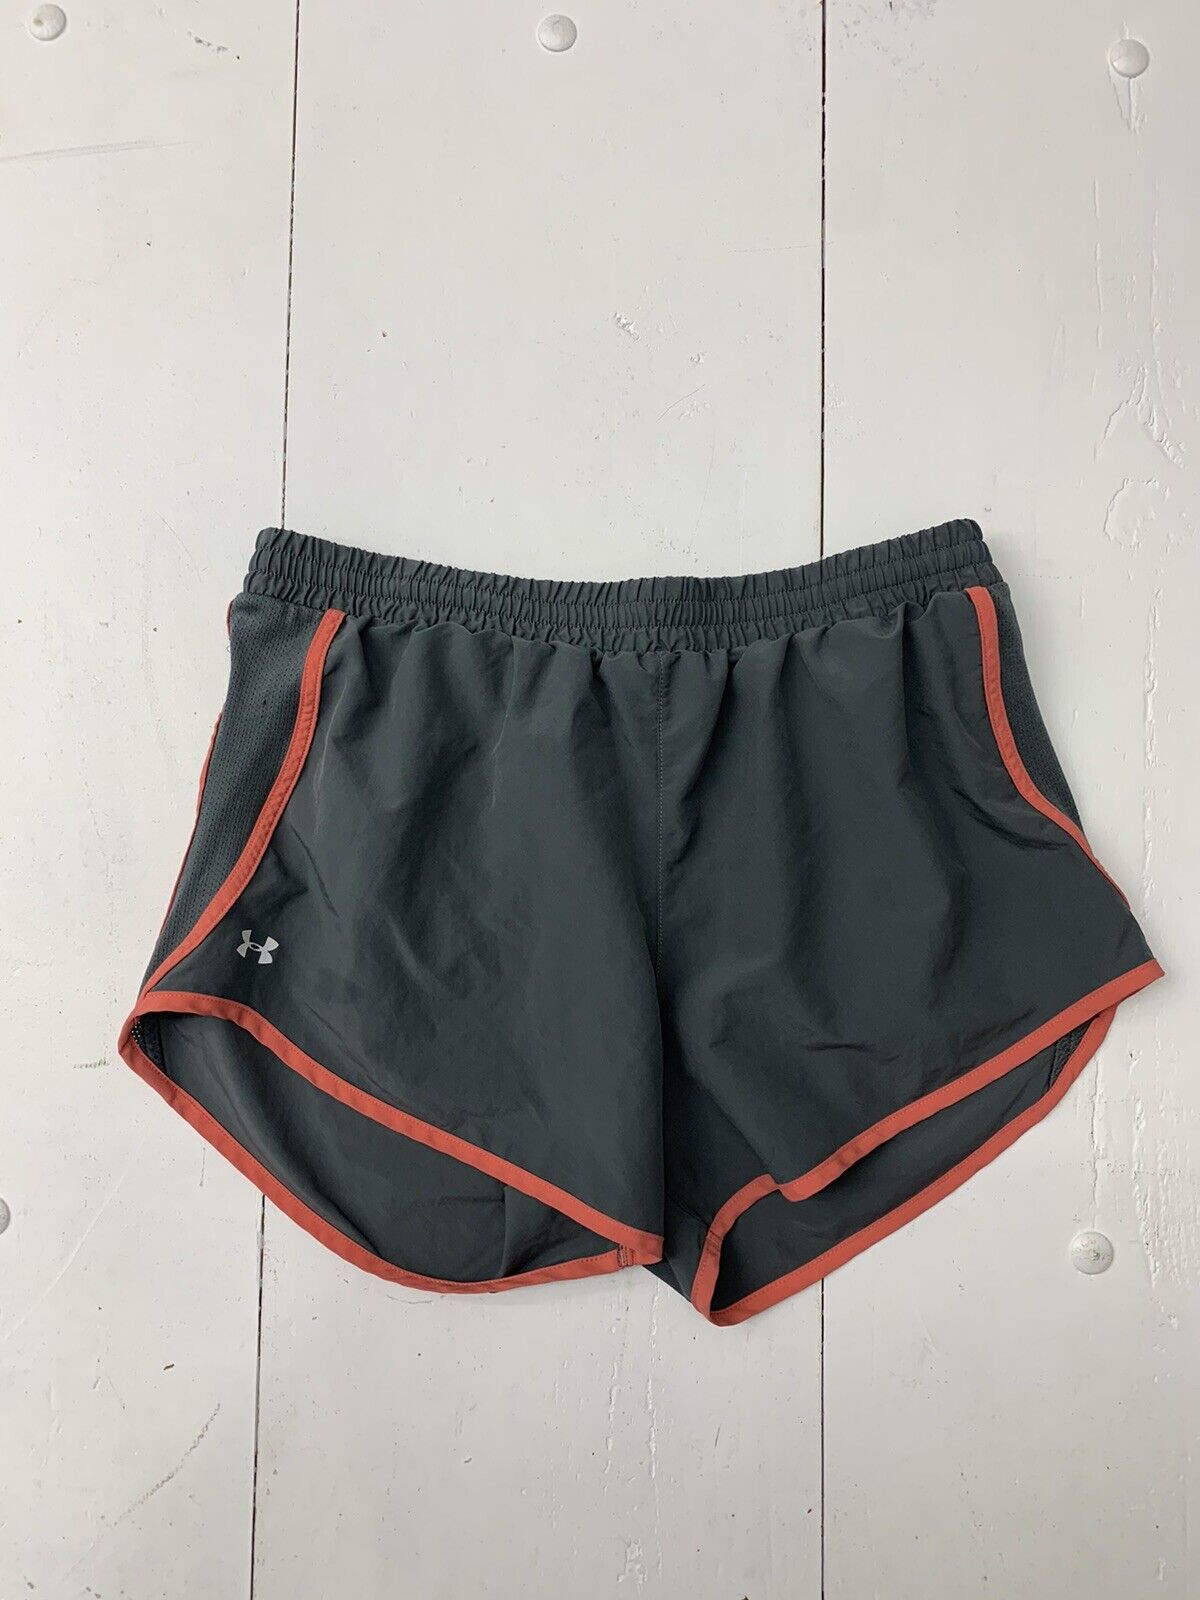 Under Armour Womens Grey Athletic Shorts Size Large